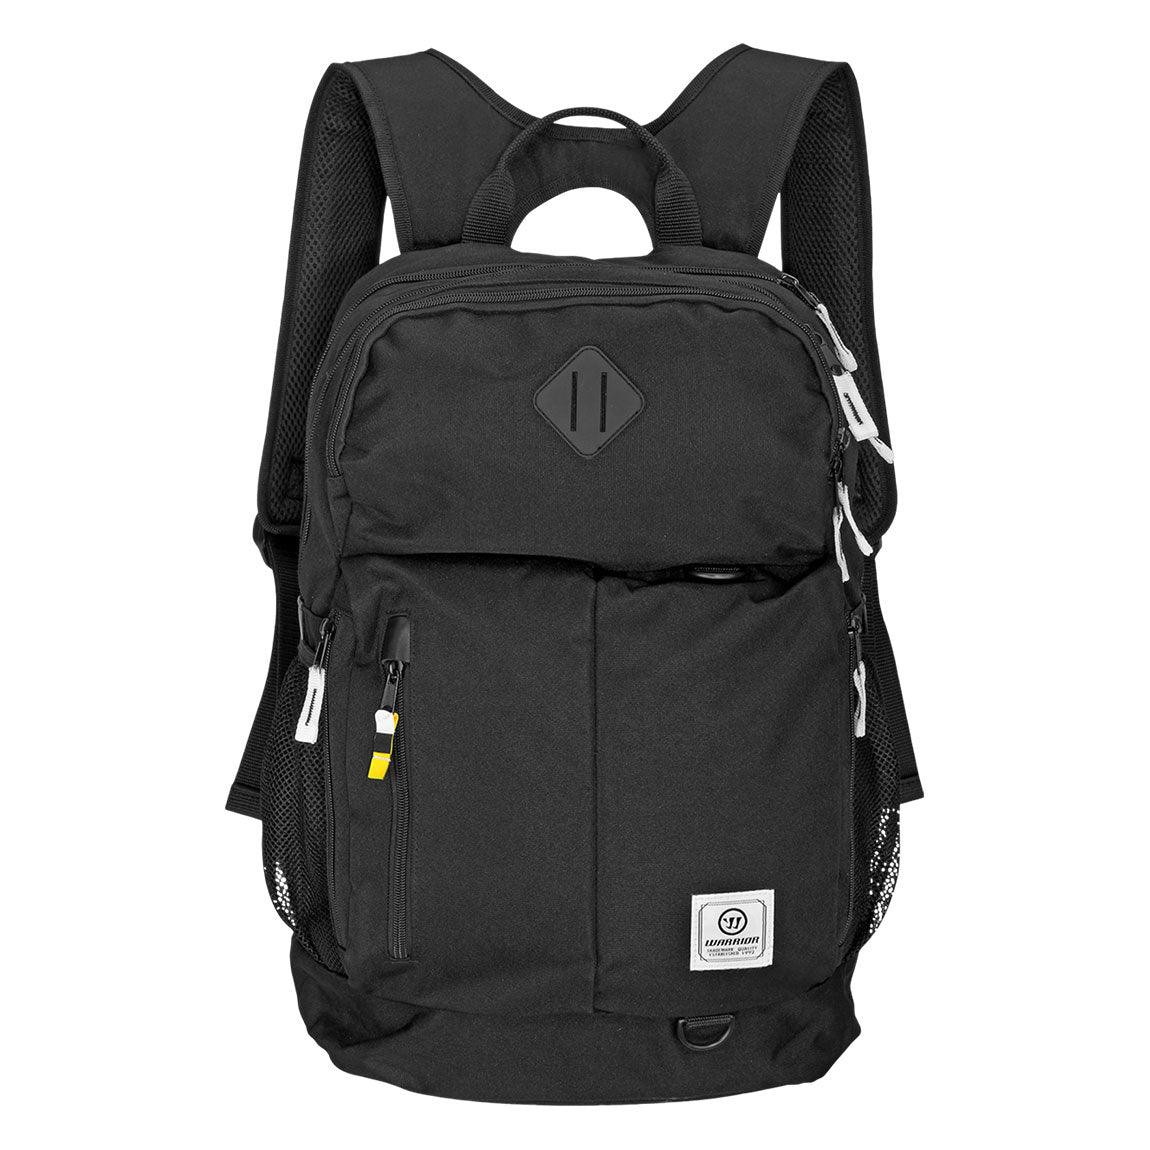 Q10 Day Backpack - Sports Excellence